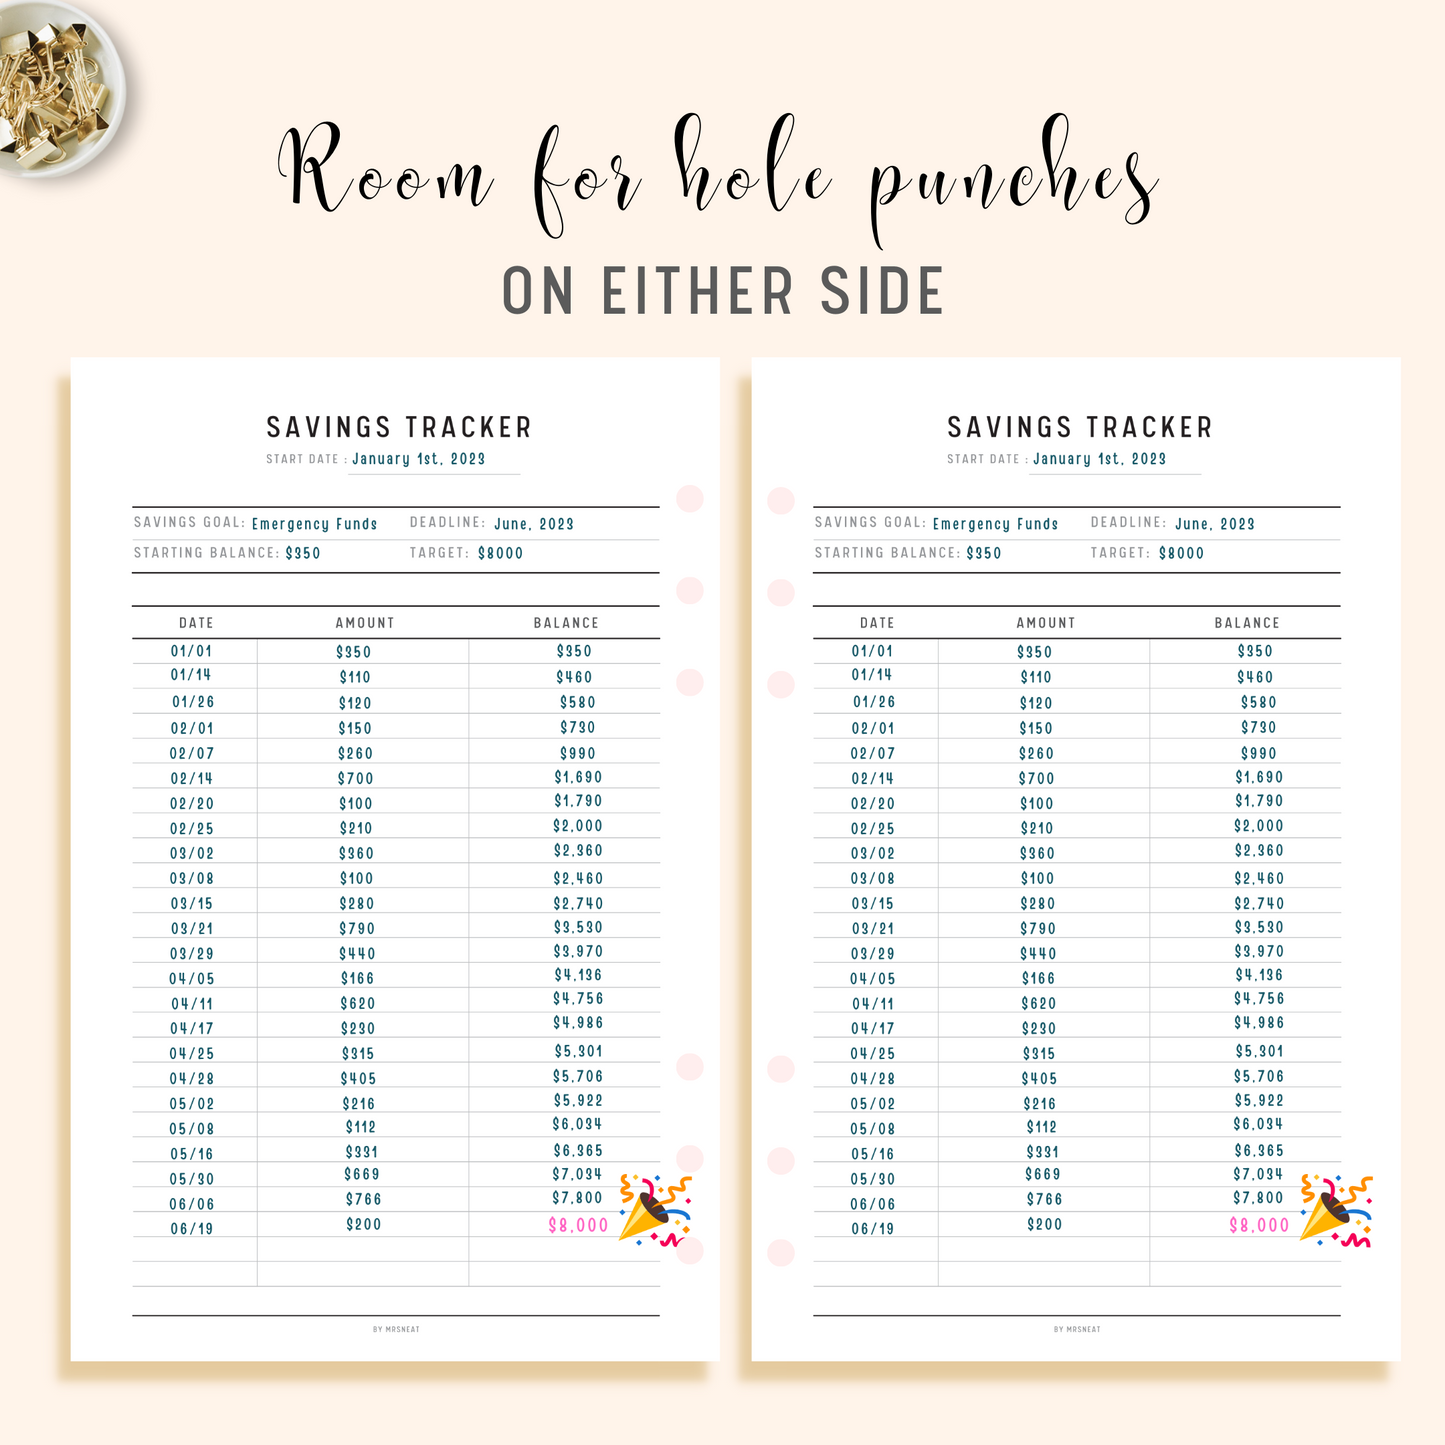 Saving Tracker Planner Printable with room for hole punches on either side